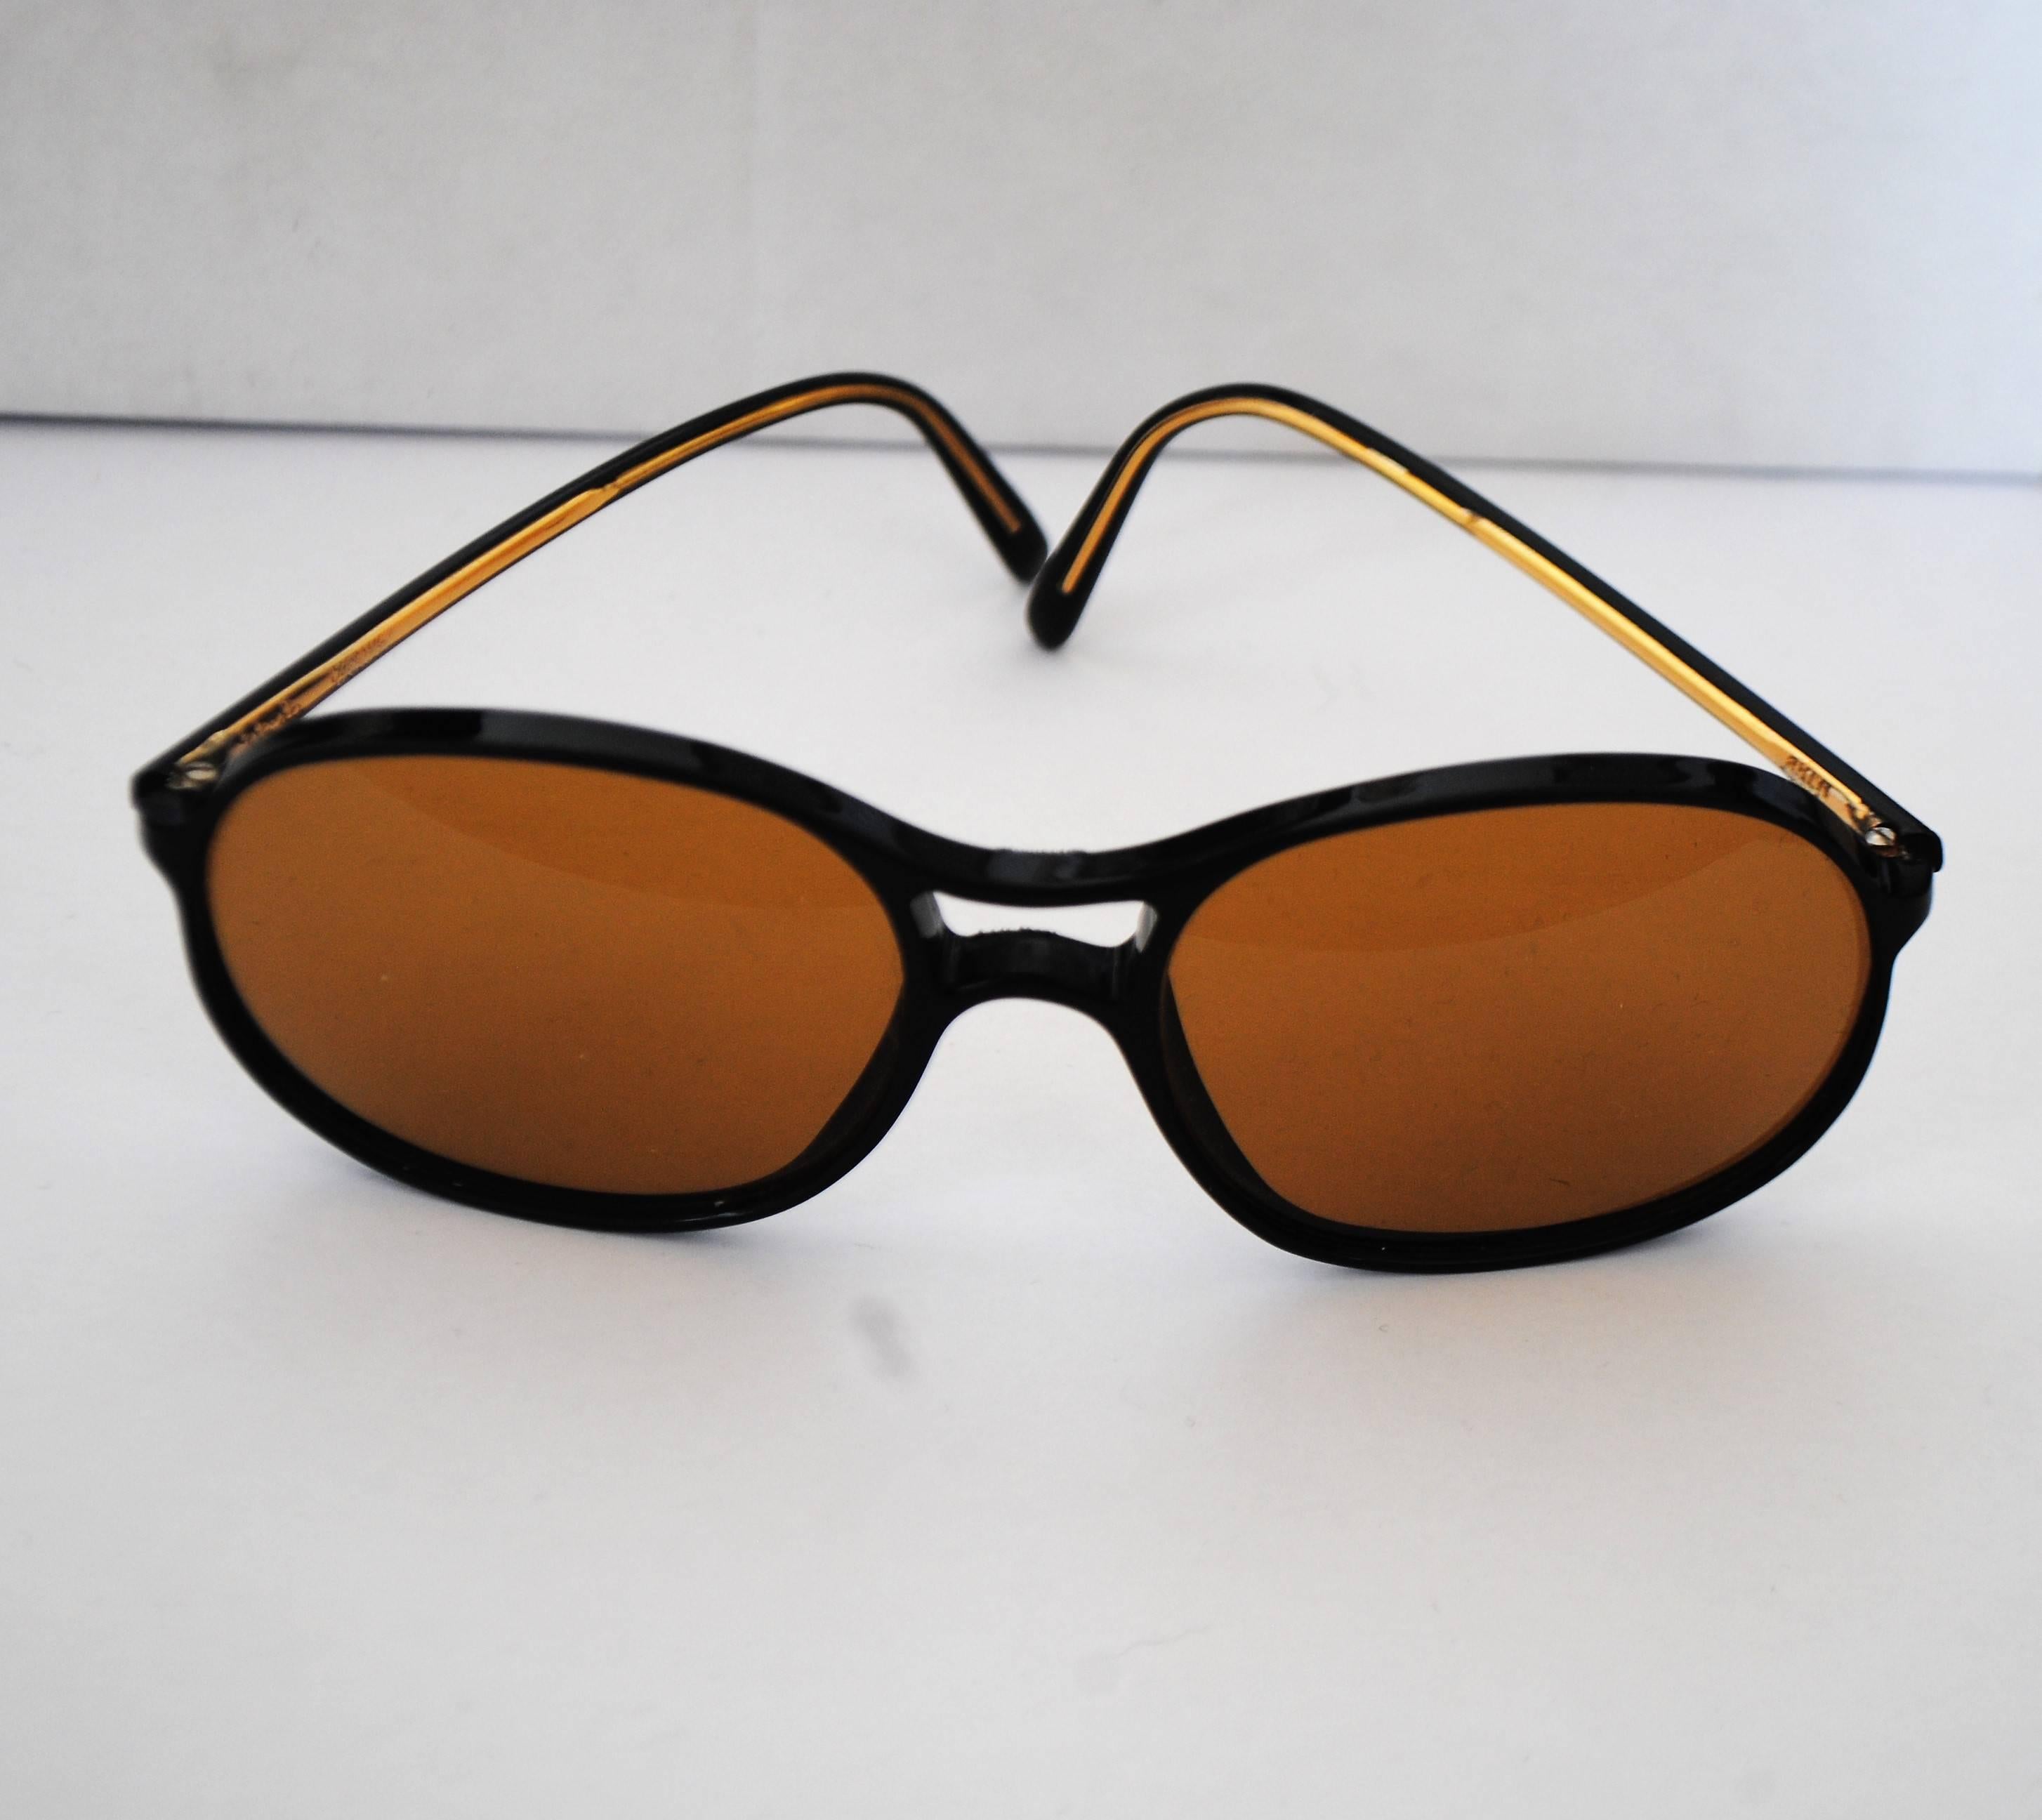 Persol for Ratti Sunglasses
Brown sunglasses in limited edition specially done for Ratti boutique,
Totally made in italy
Sunglasses measurements: 15 cm x 12 cm
Glasses measurements: 5 x 6 cm